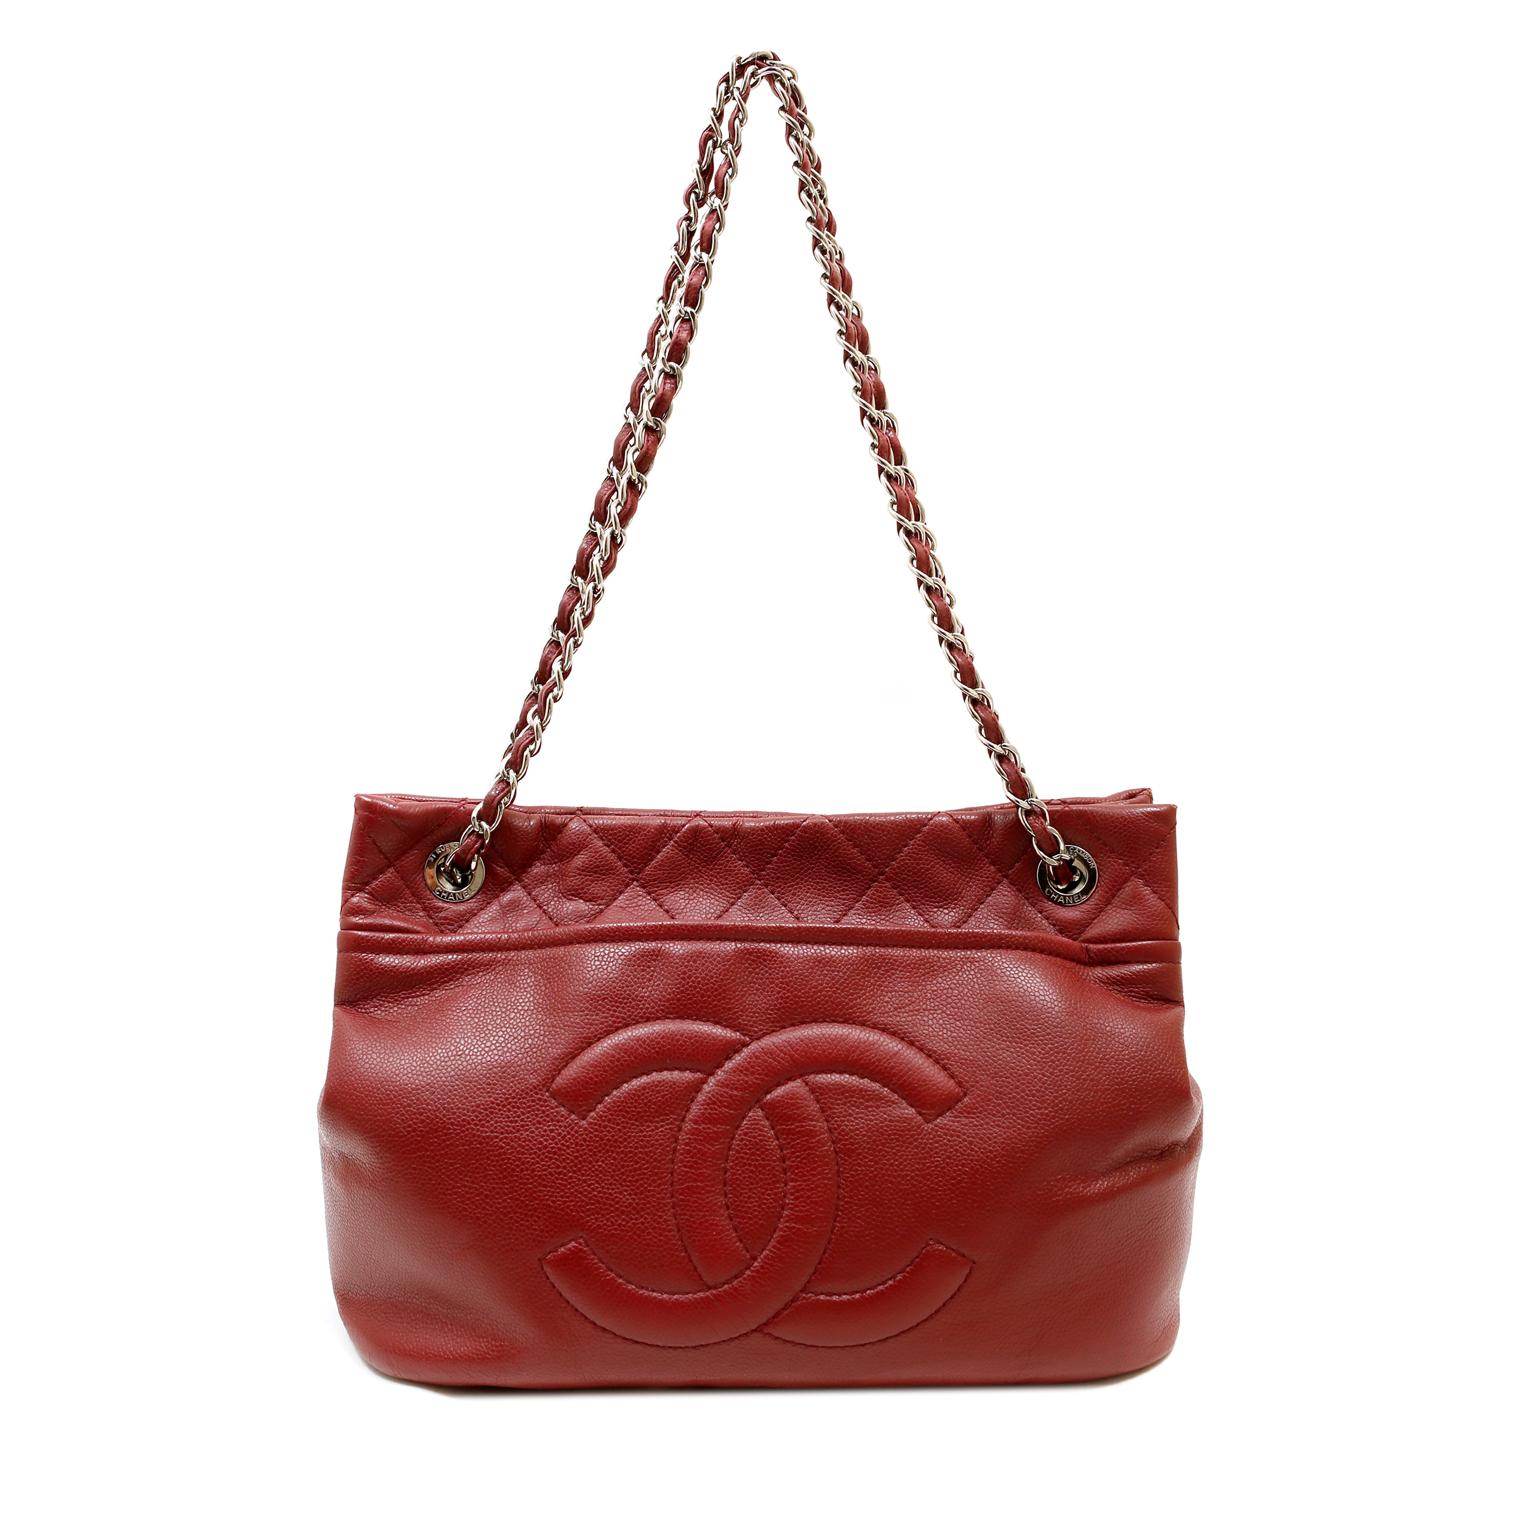 Chanel Red Caviar Leather CC Tote For Sale 1